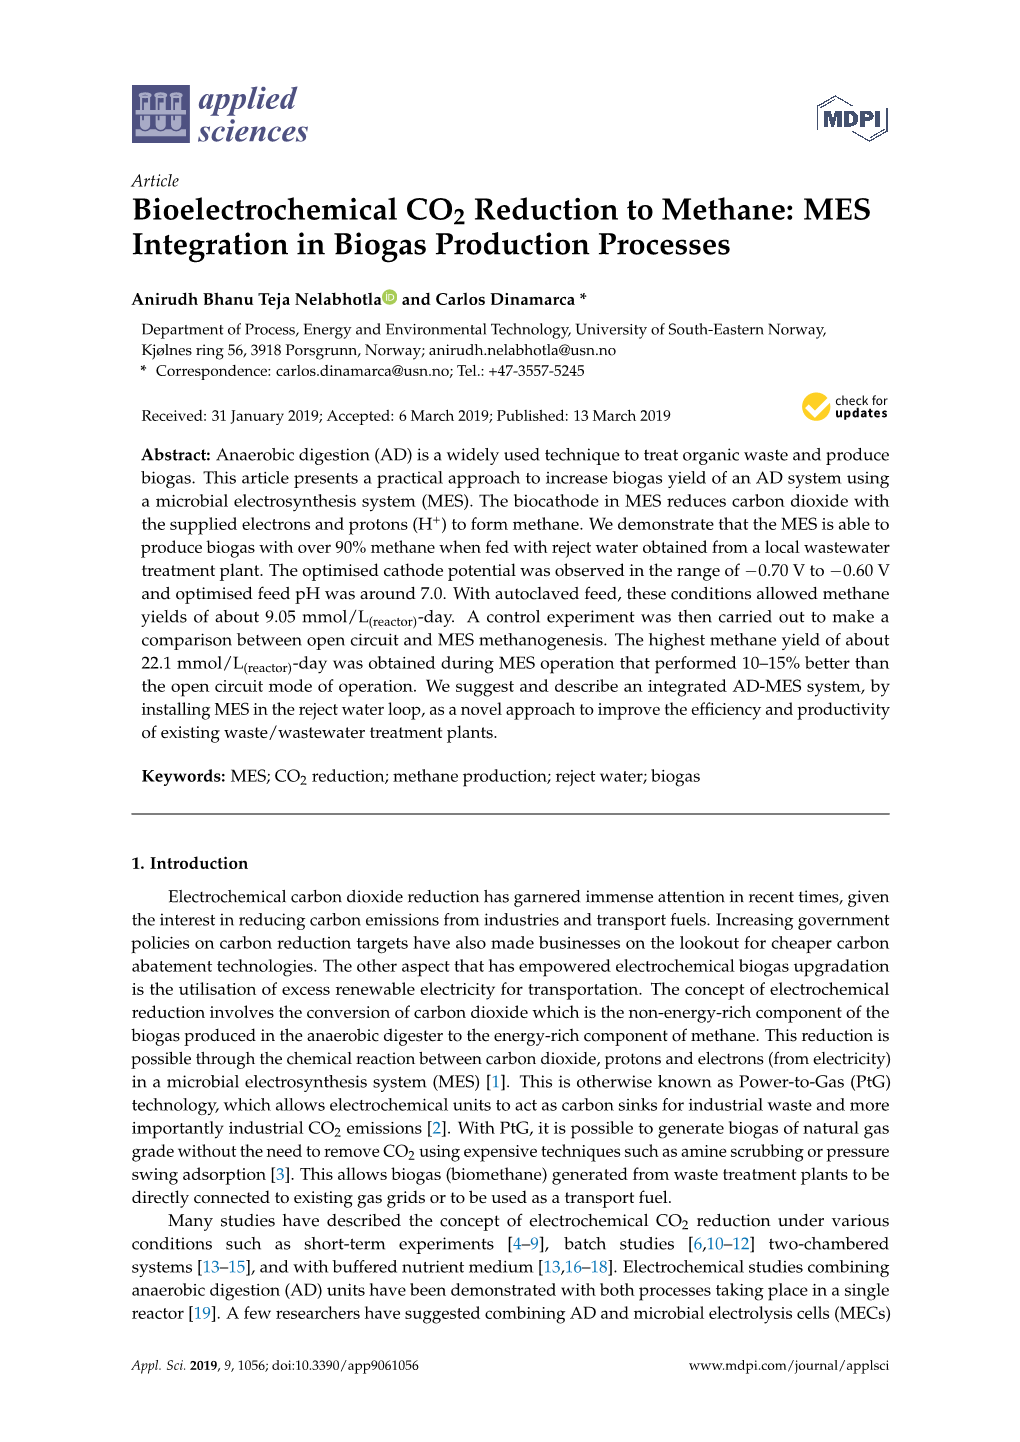 Bioelectrochemical CO2 Reduction to Methane: MES Integration in Biogas Production Processes